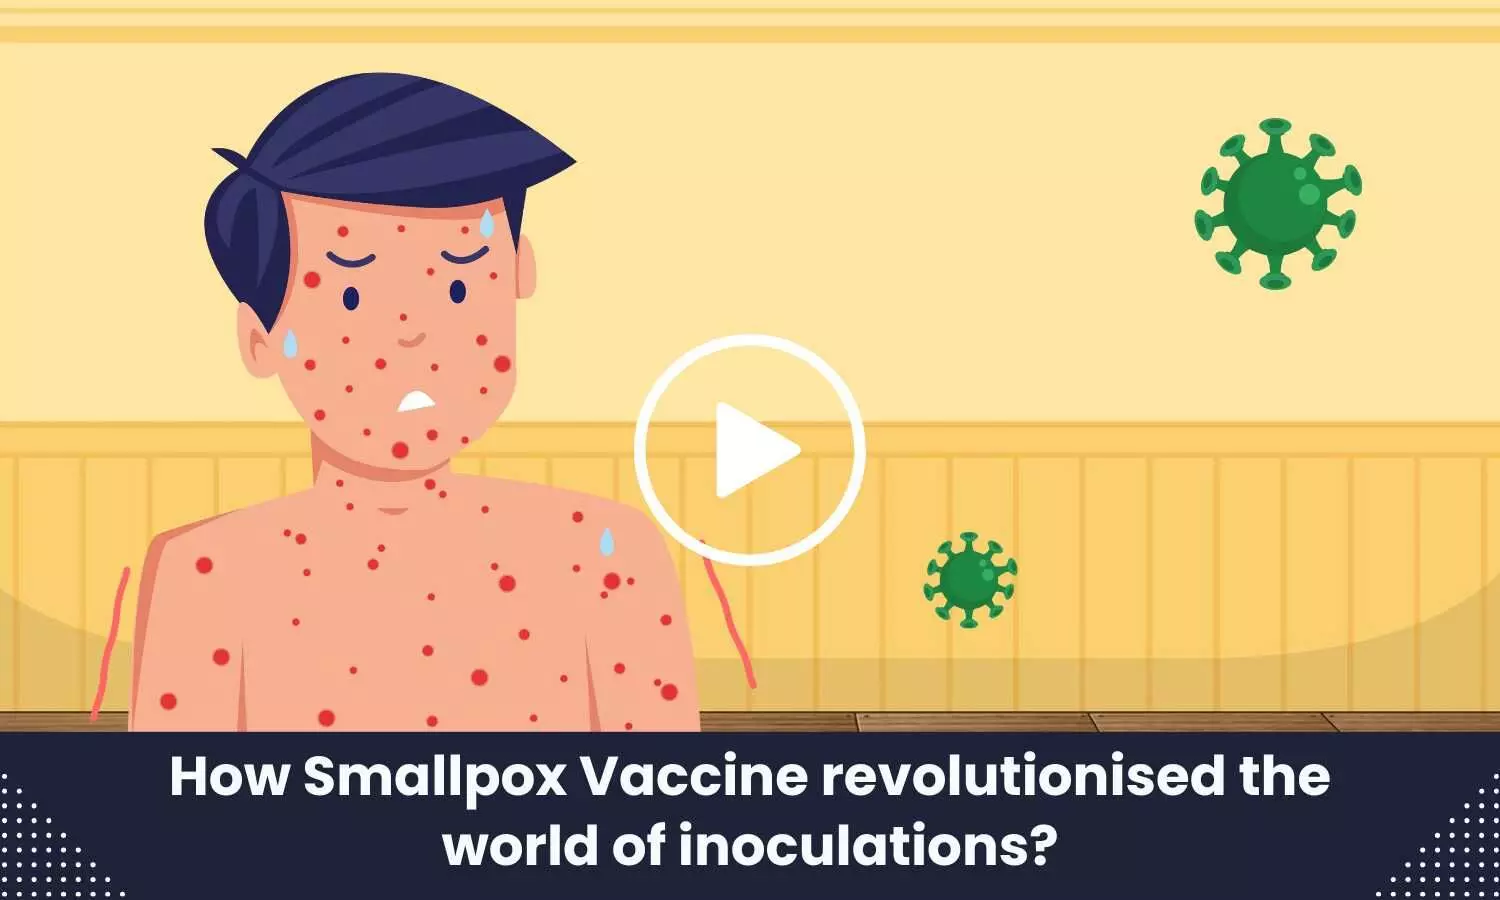 How did the Smallpox Vaccine revolutionise the world of inoculations?